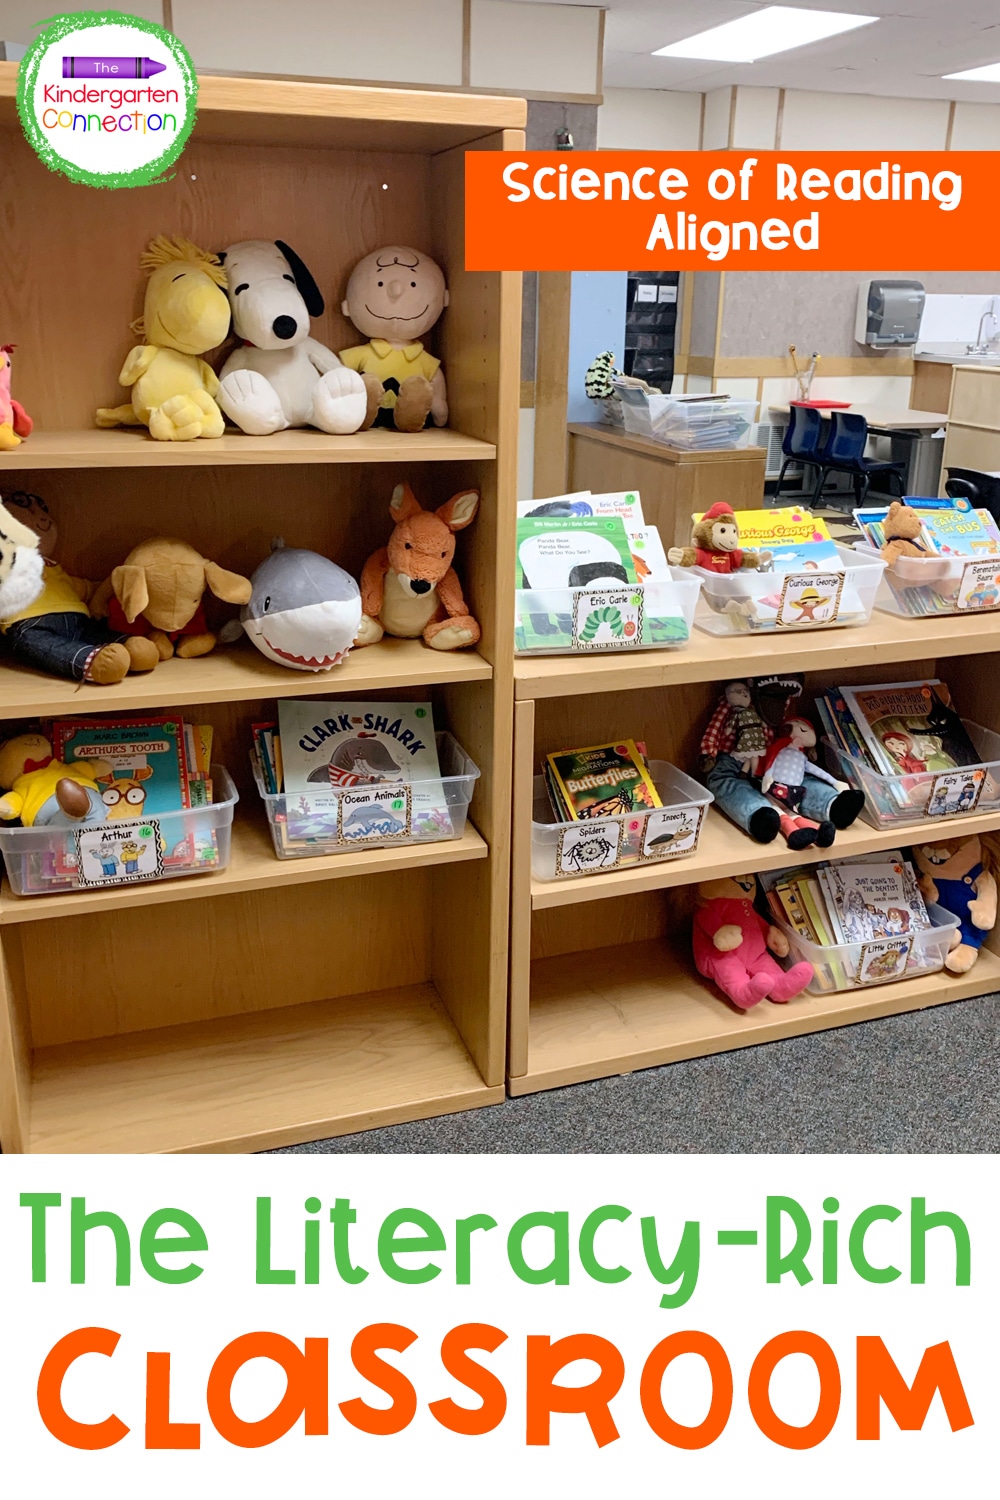 The Literacy-Rich Classroom